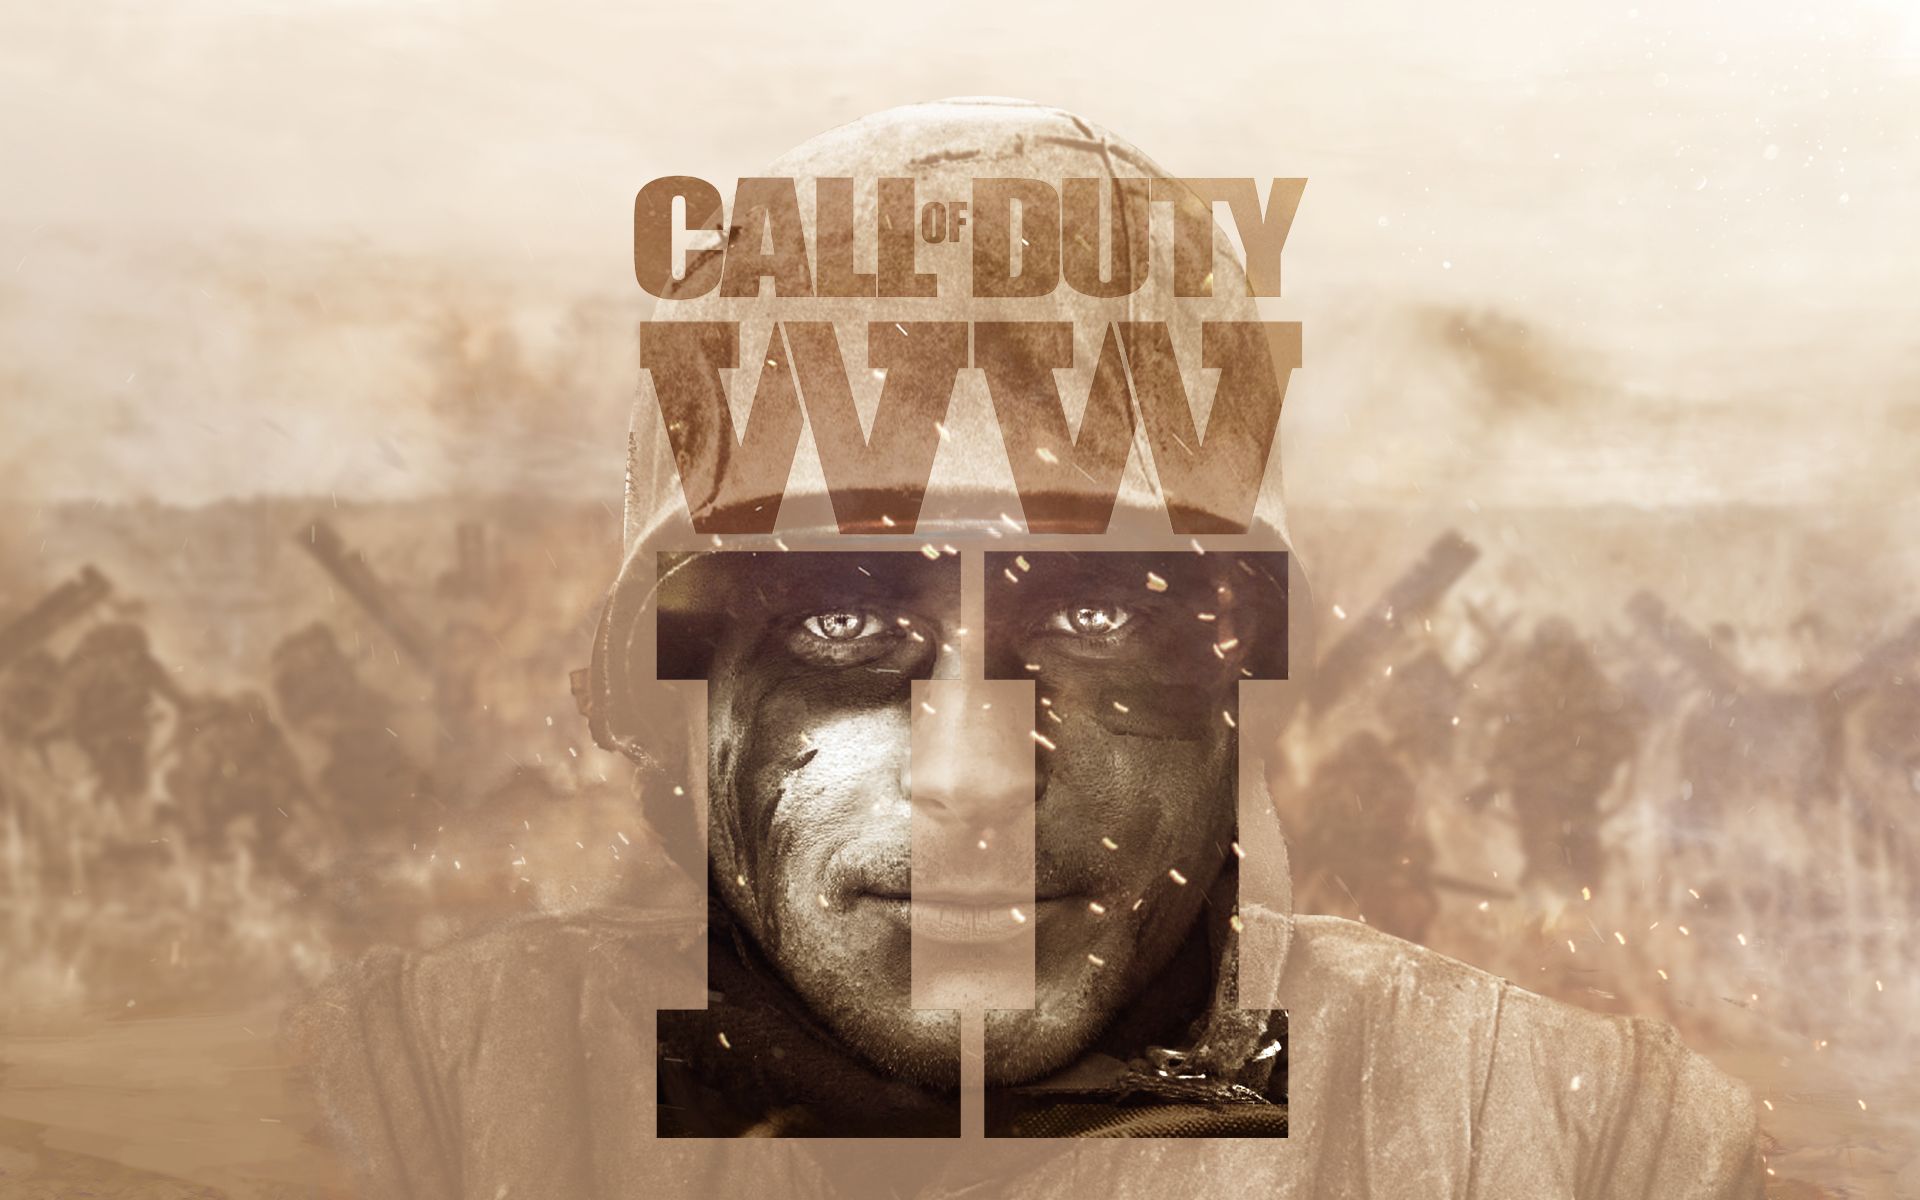 video game, call of duty: wwii, call of duty